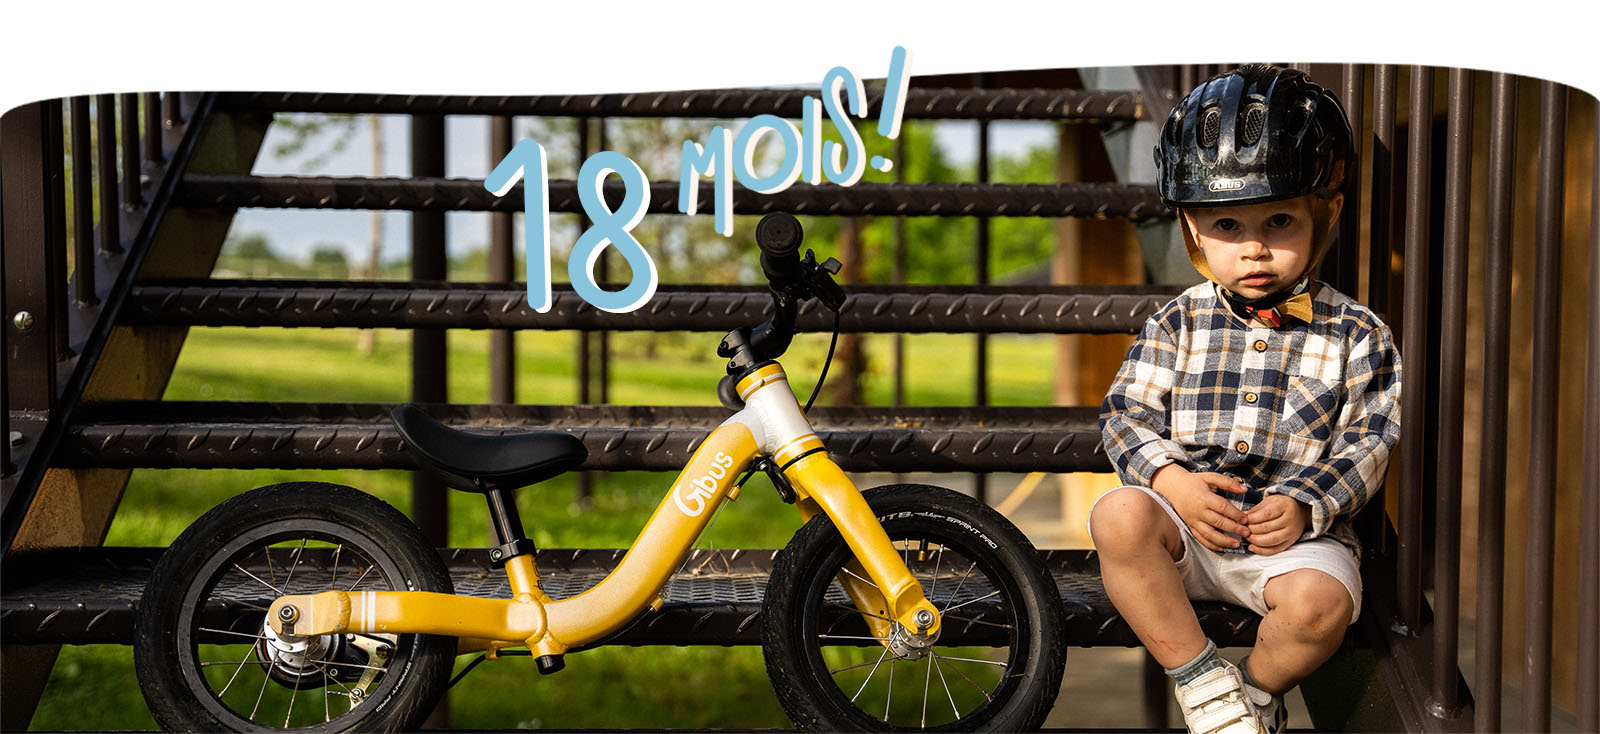 Draisienne 18 mois : comment choisir ? – Gibus Cycles